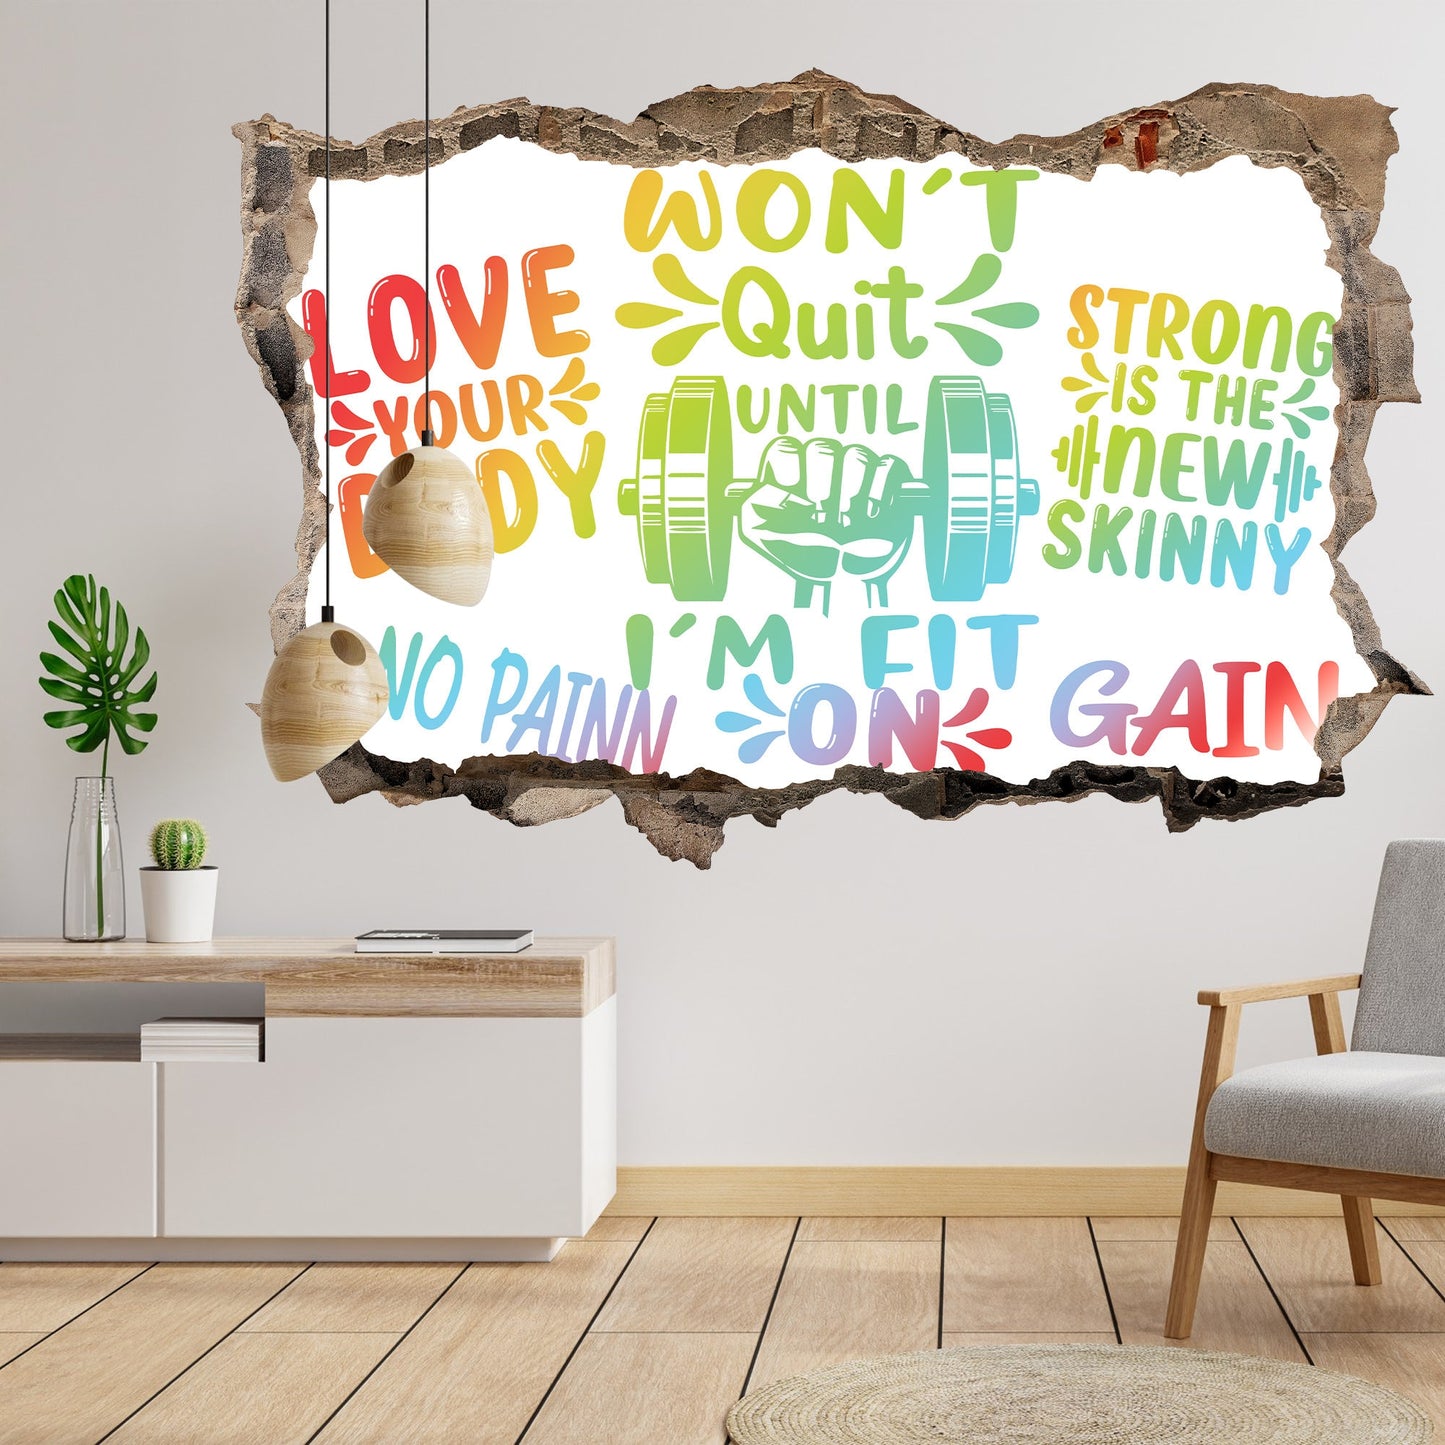 3D Fitness Motivation Wall Decal - Creative Fonts, Inspiring Gym Quotes, Room Decor- BW019